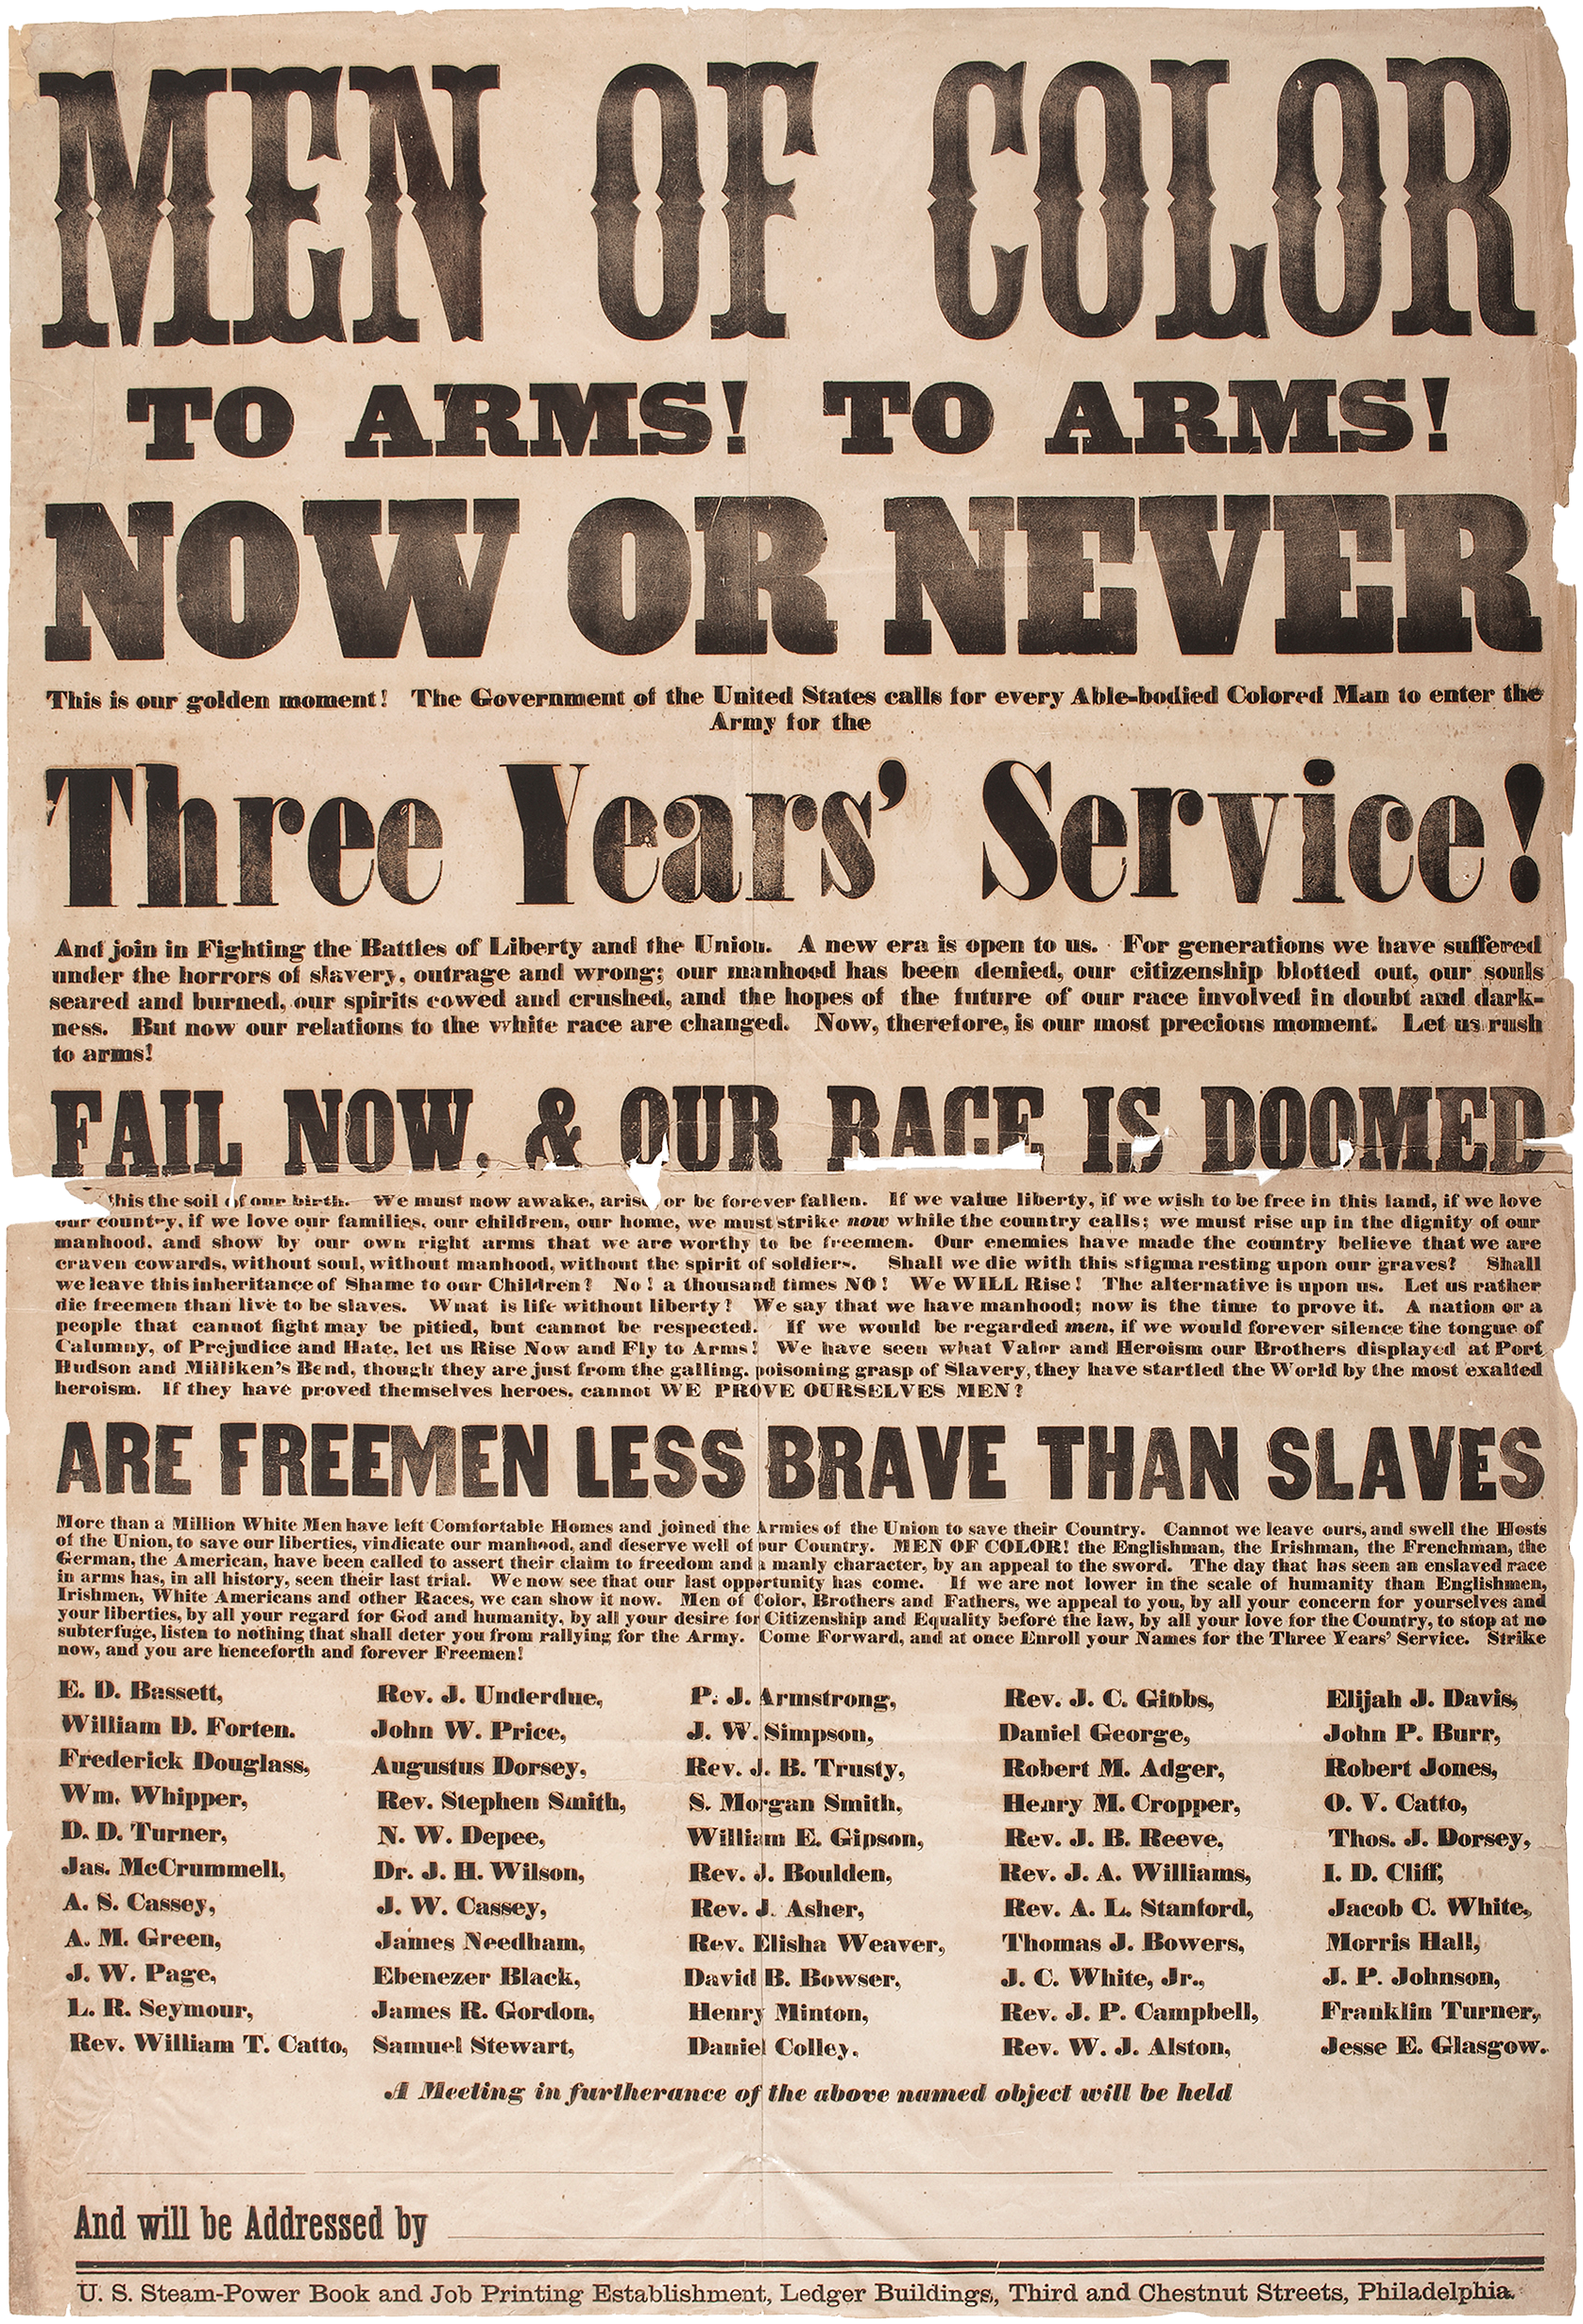 An 1863 recruitment poster printed in large black letters on old paper calling for the enlistment of African Americans into the Union military.